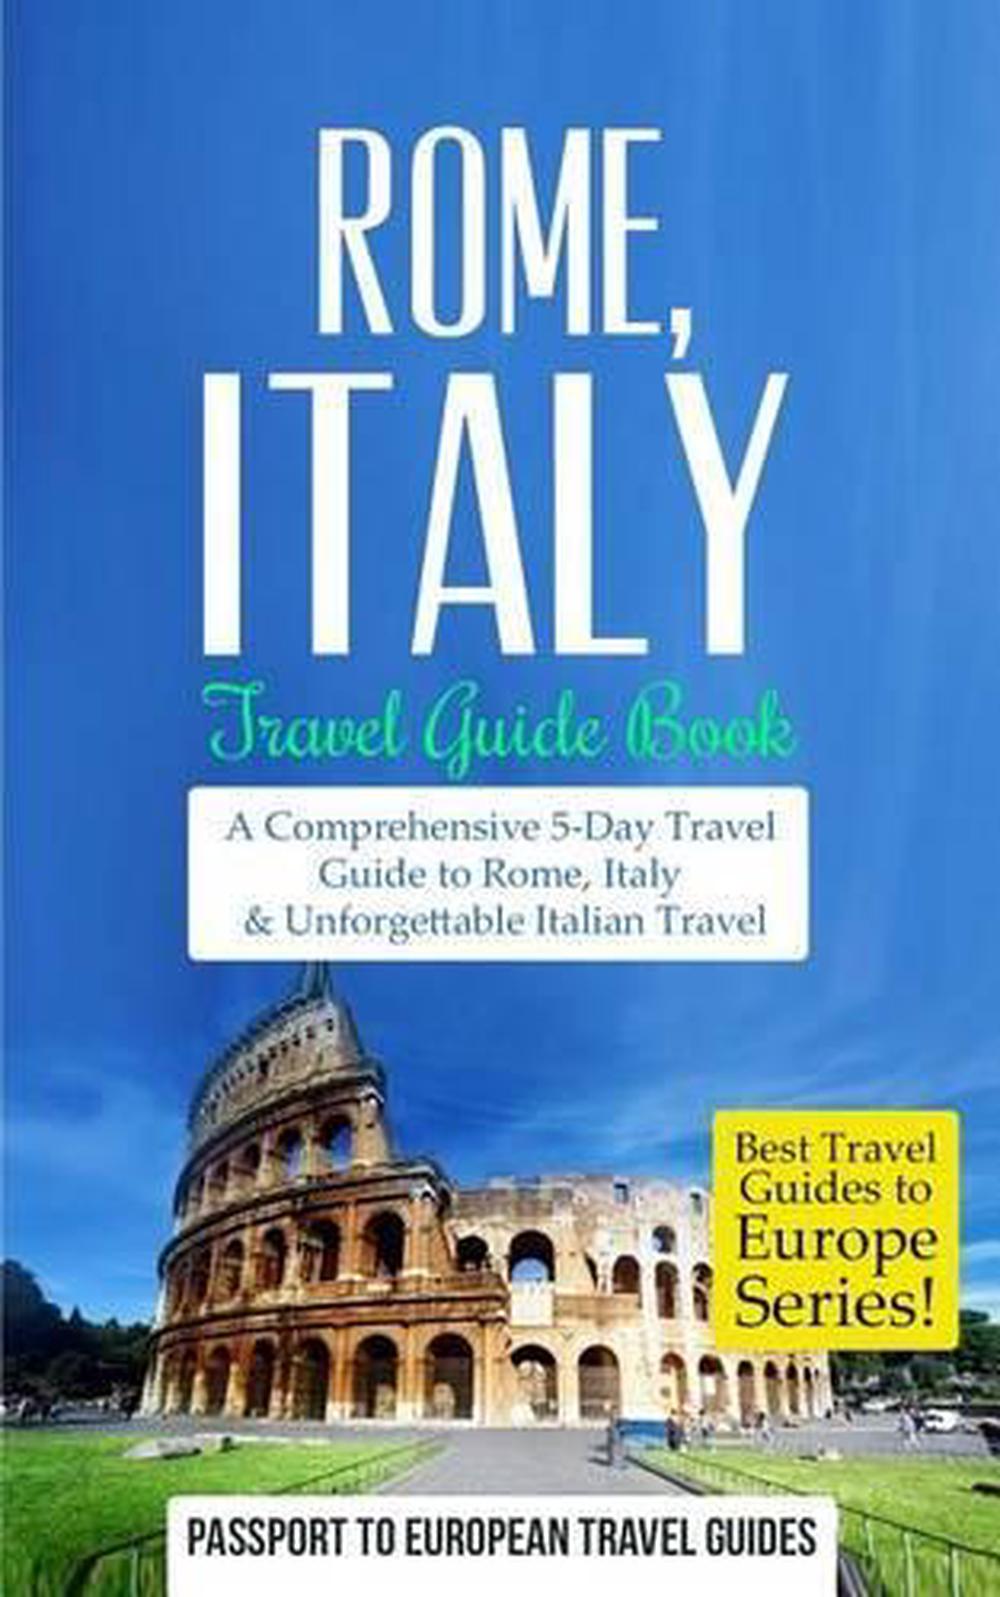 tour guides for rome